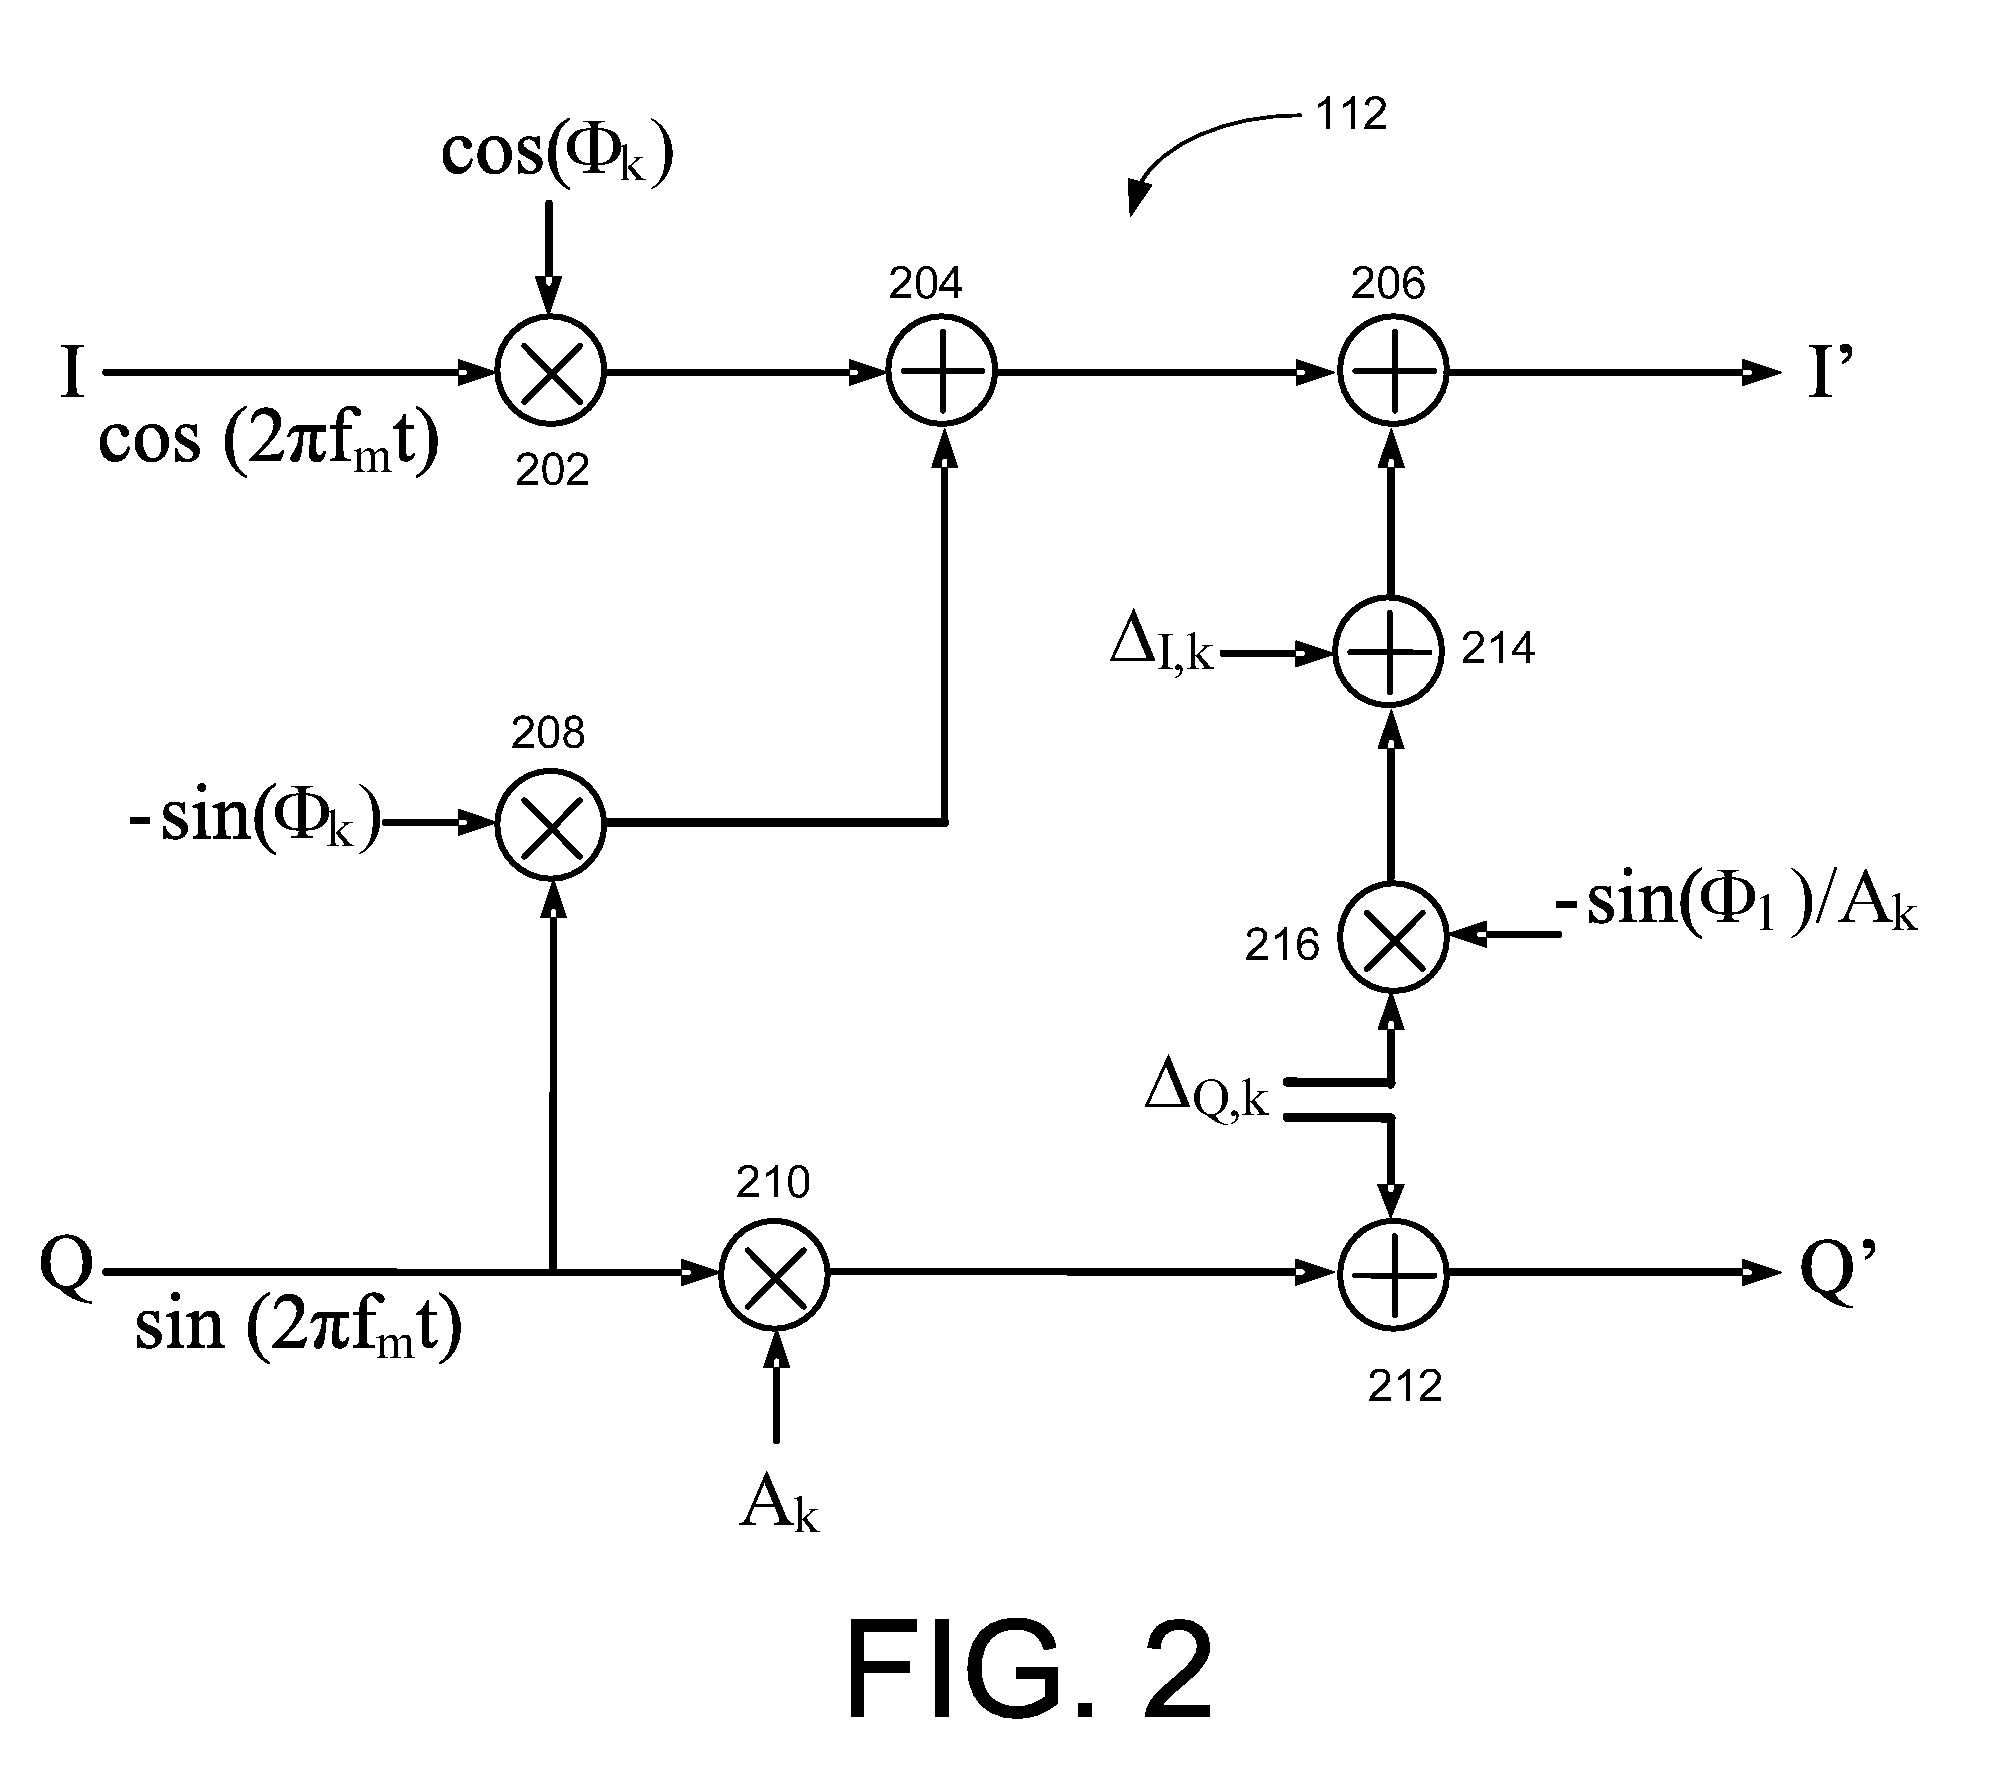 Systems and Methods for Transmitter Calibration